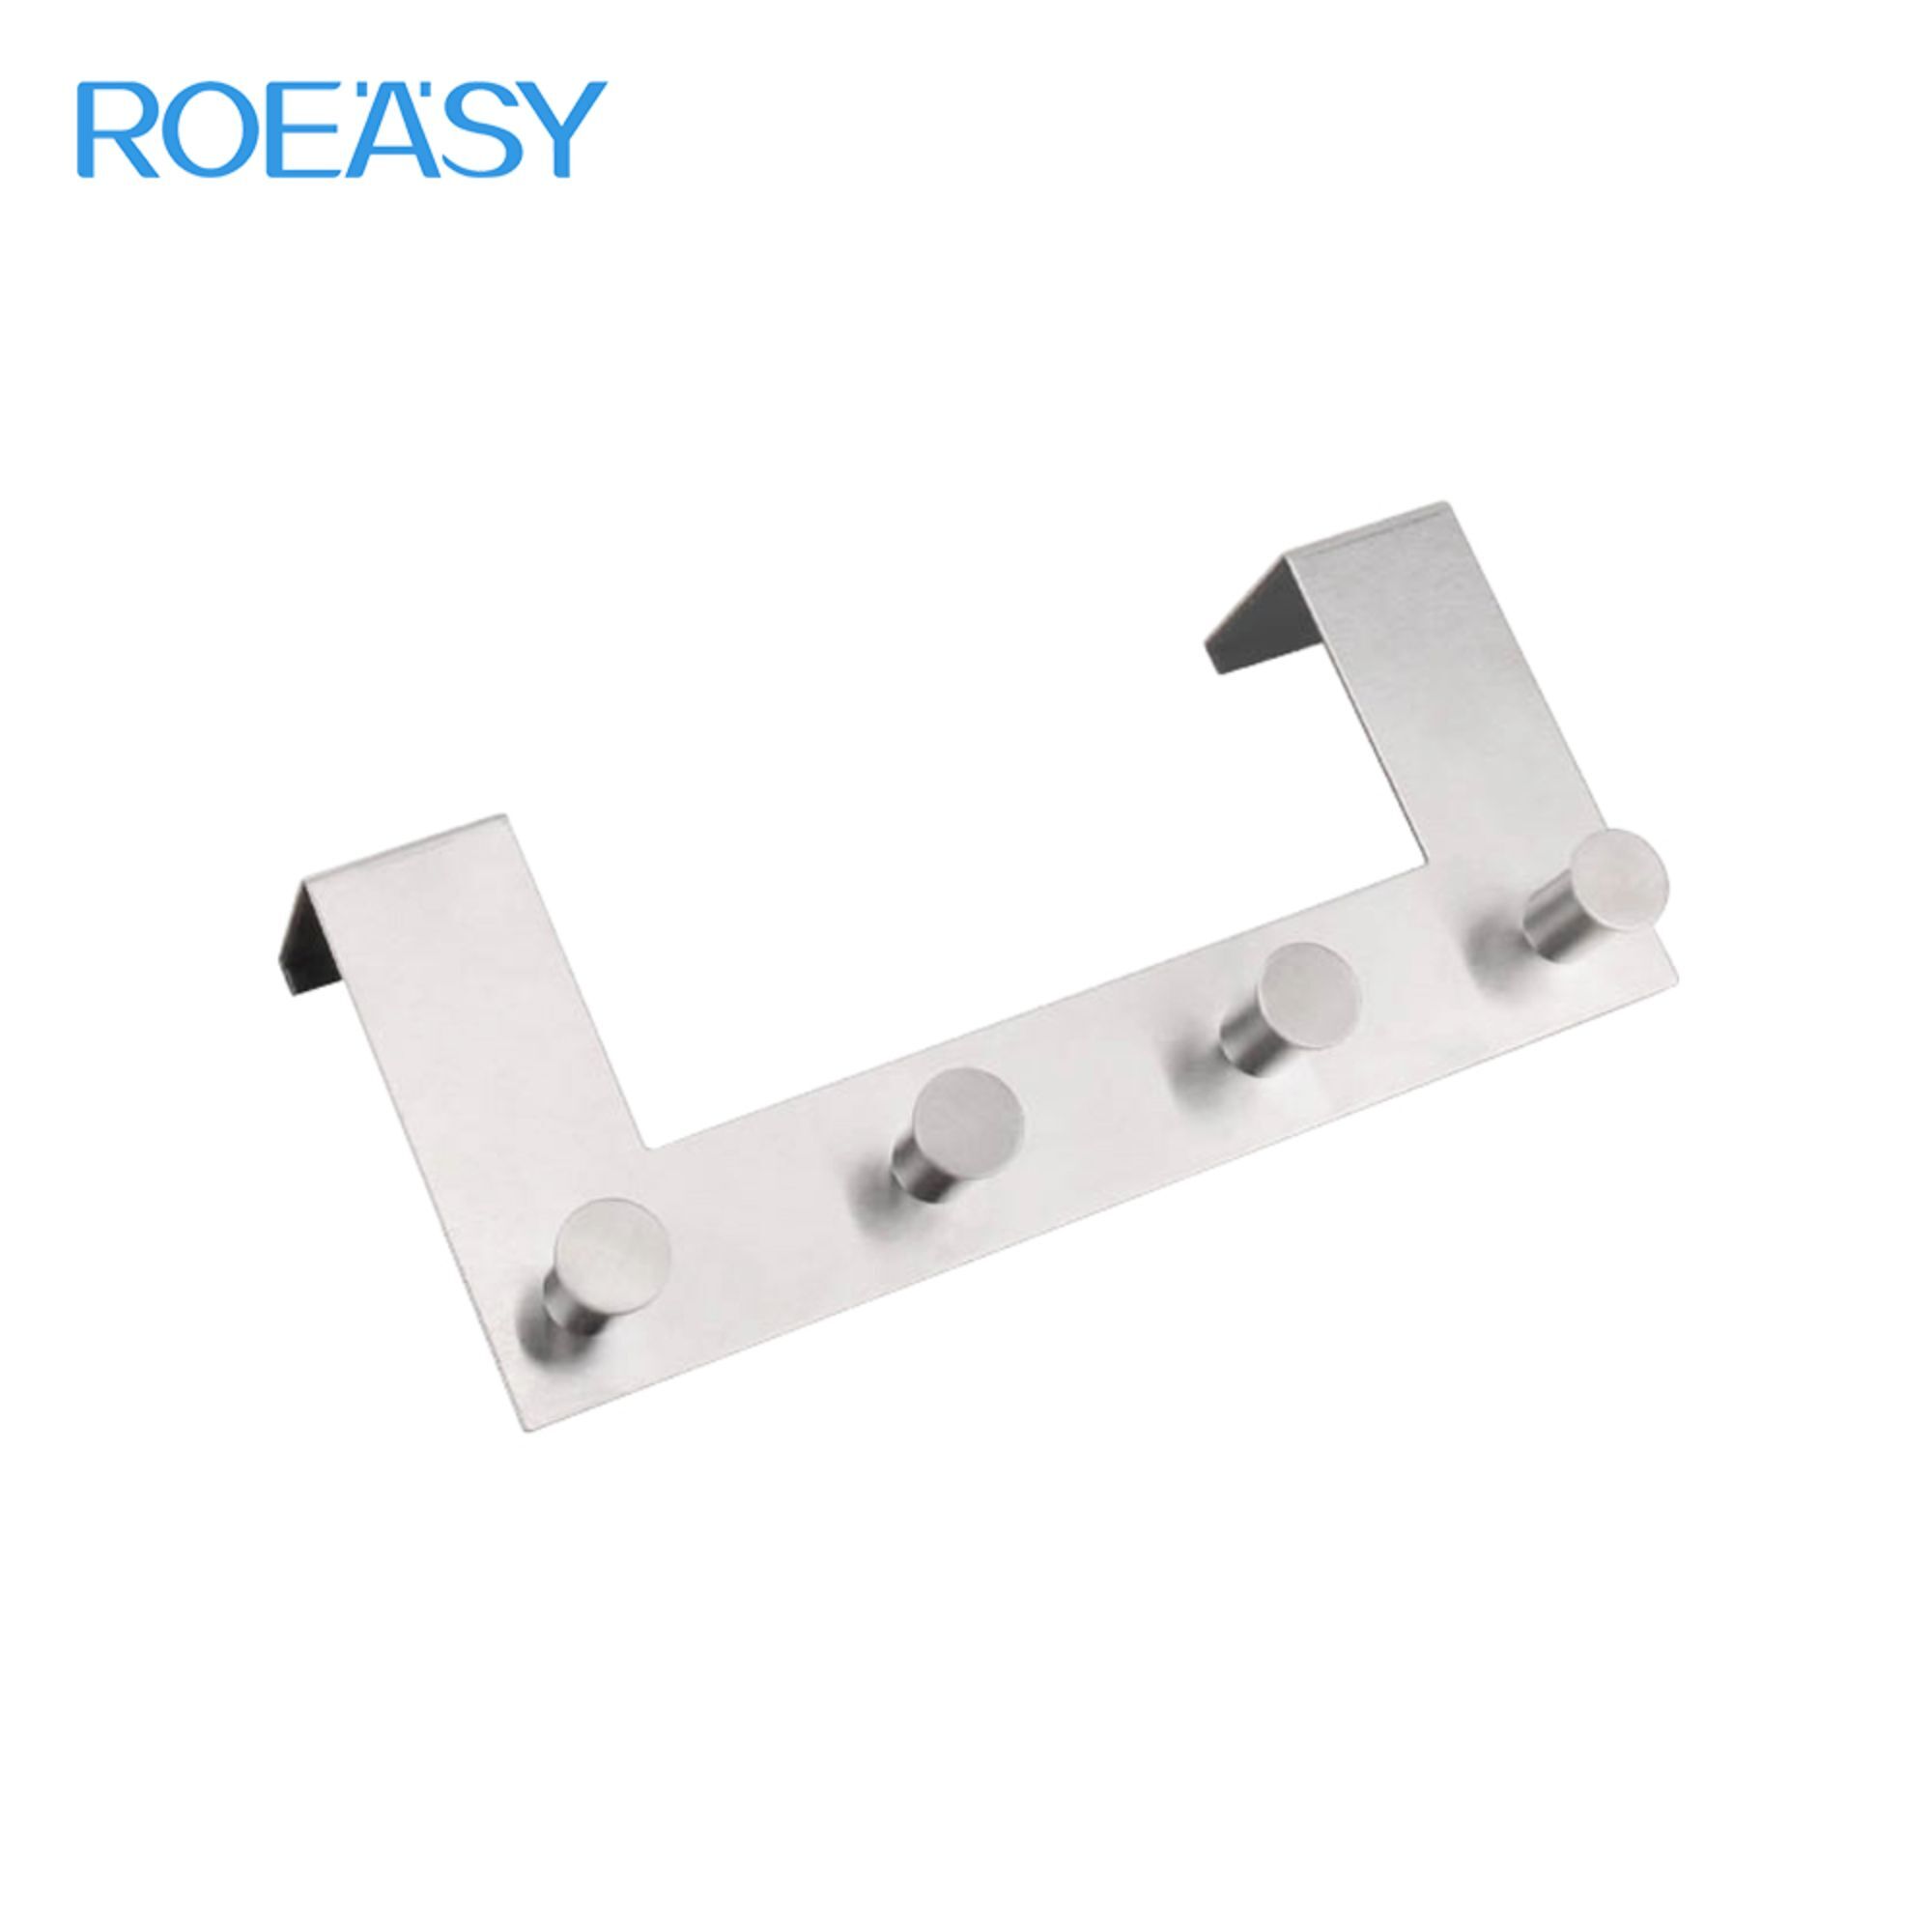 ROEASY FCS014  Foldable Stainless steel Folding Organizer Rack Metal Hanging Over The Hanger Door Cloth Hook Towel Coat Hooks For Clothes